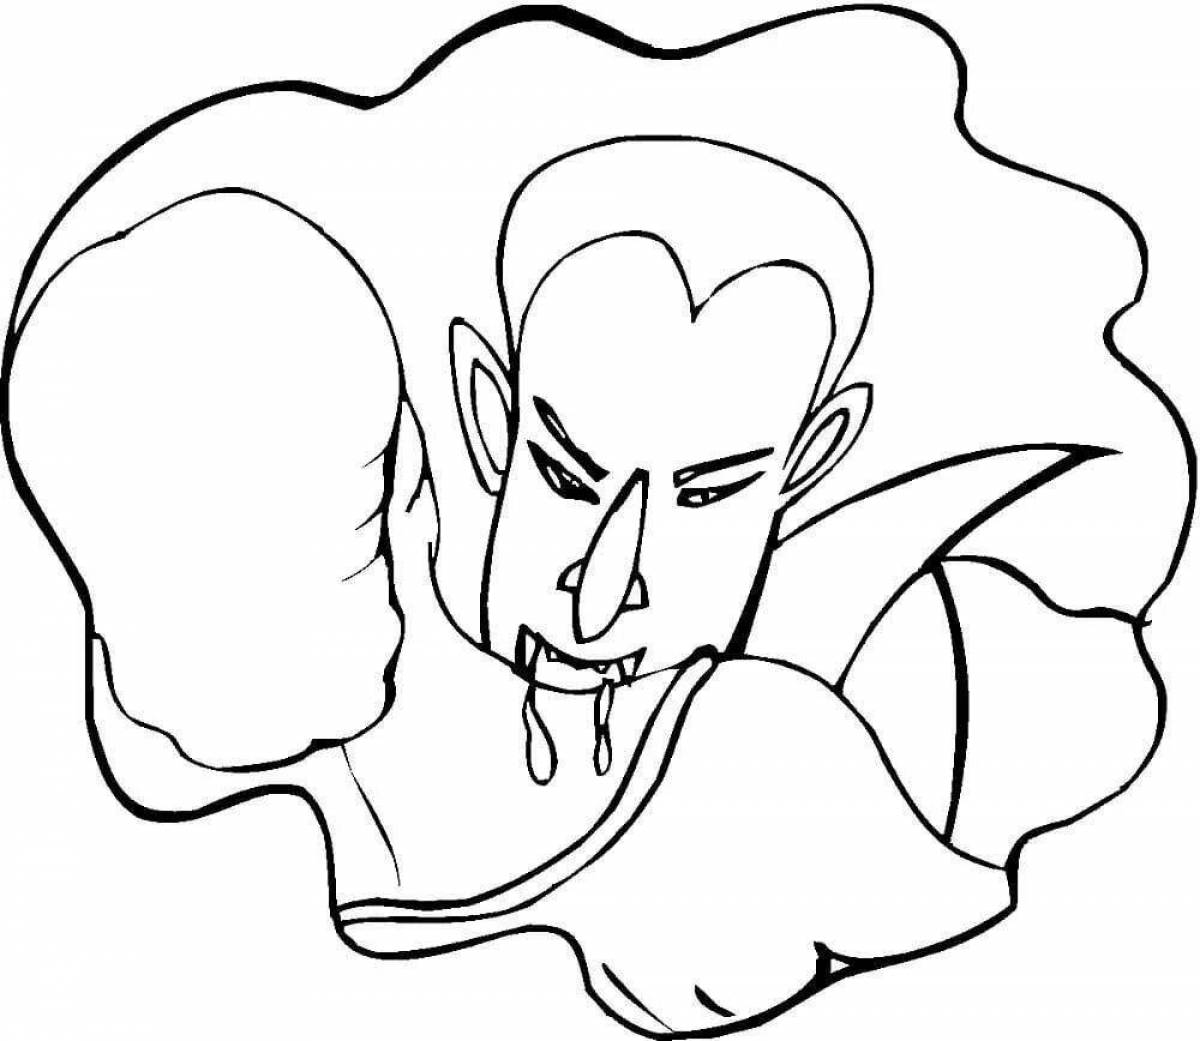 Terrible vampire coloring page